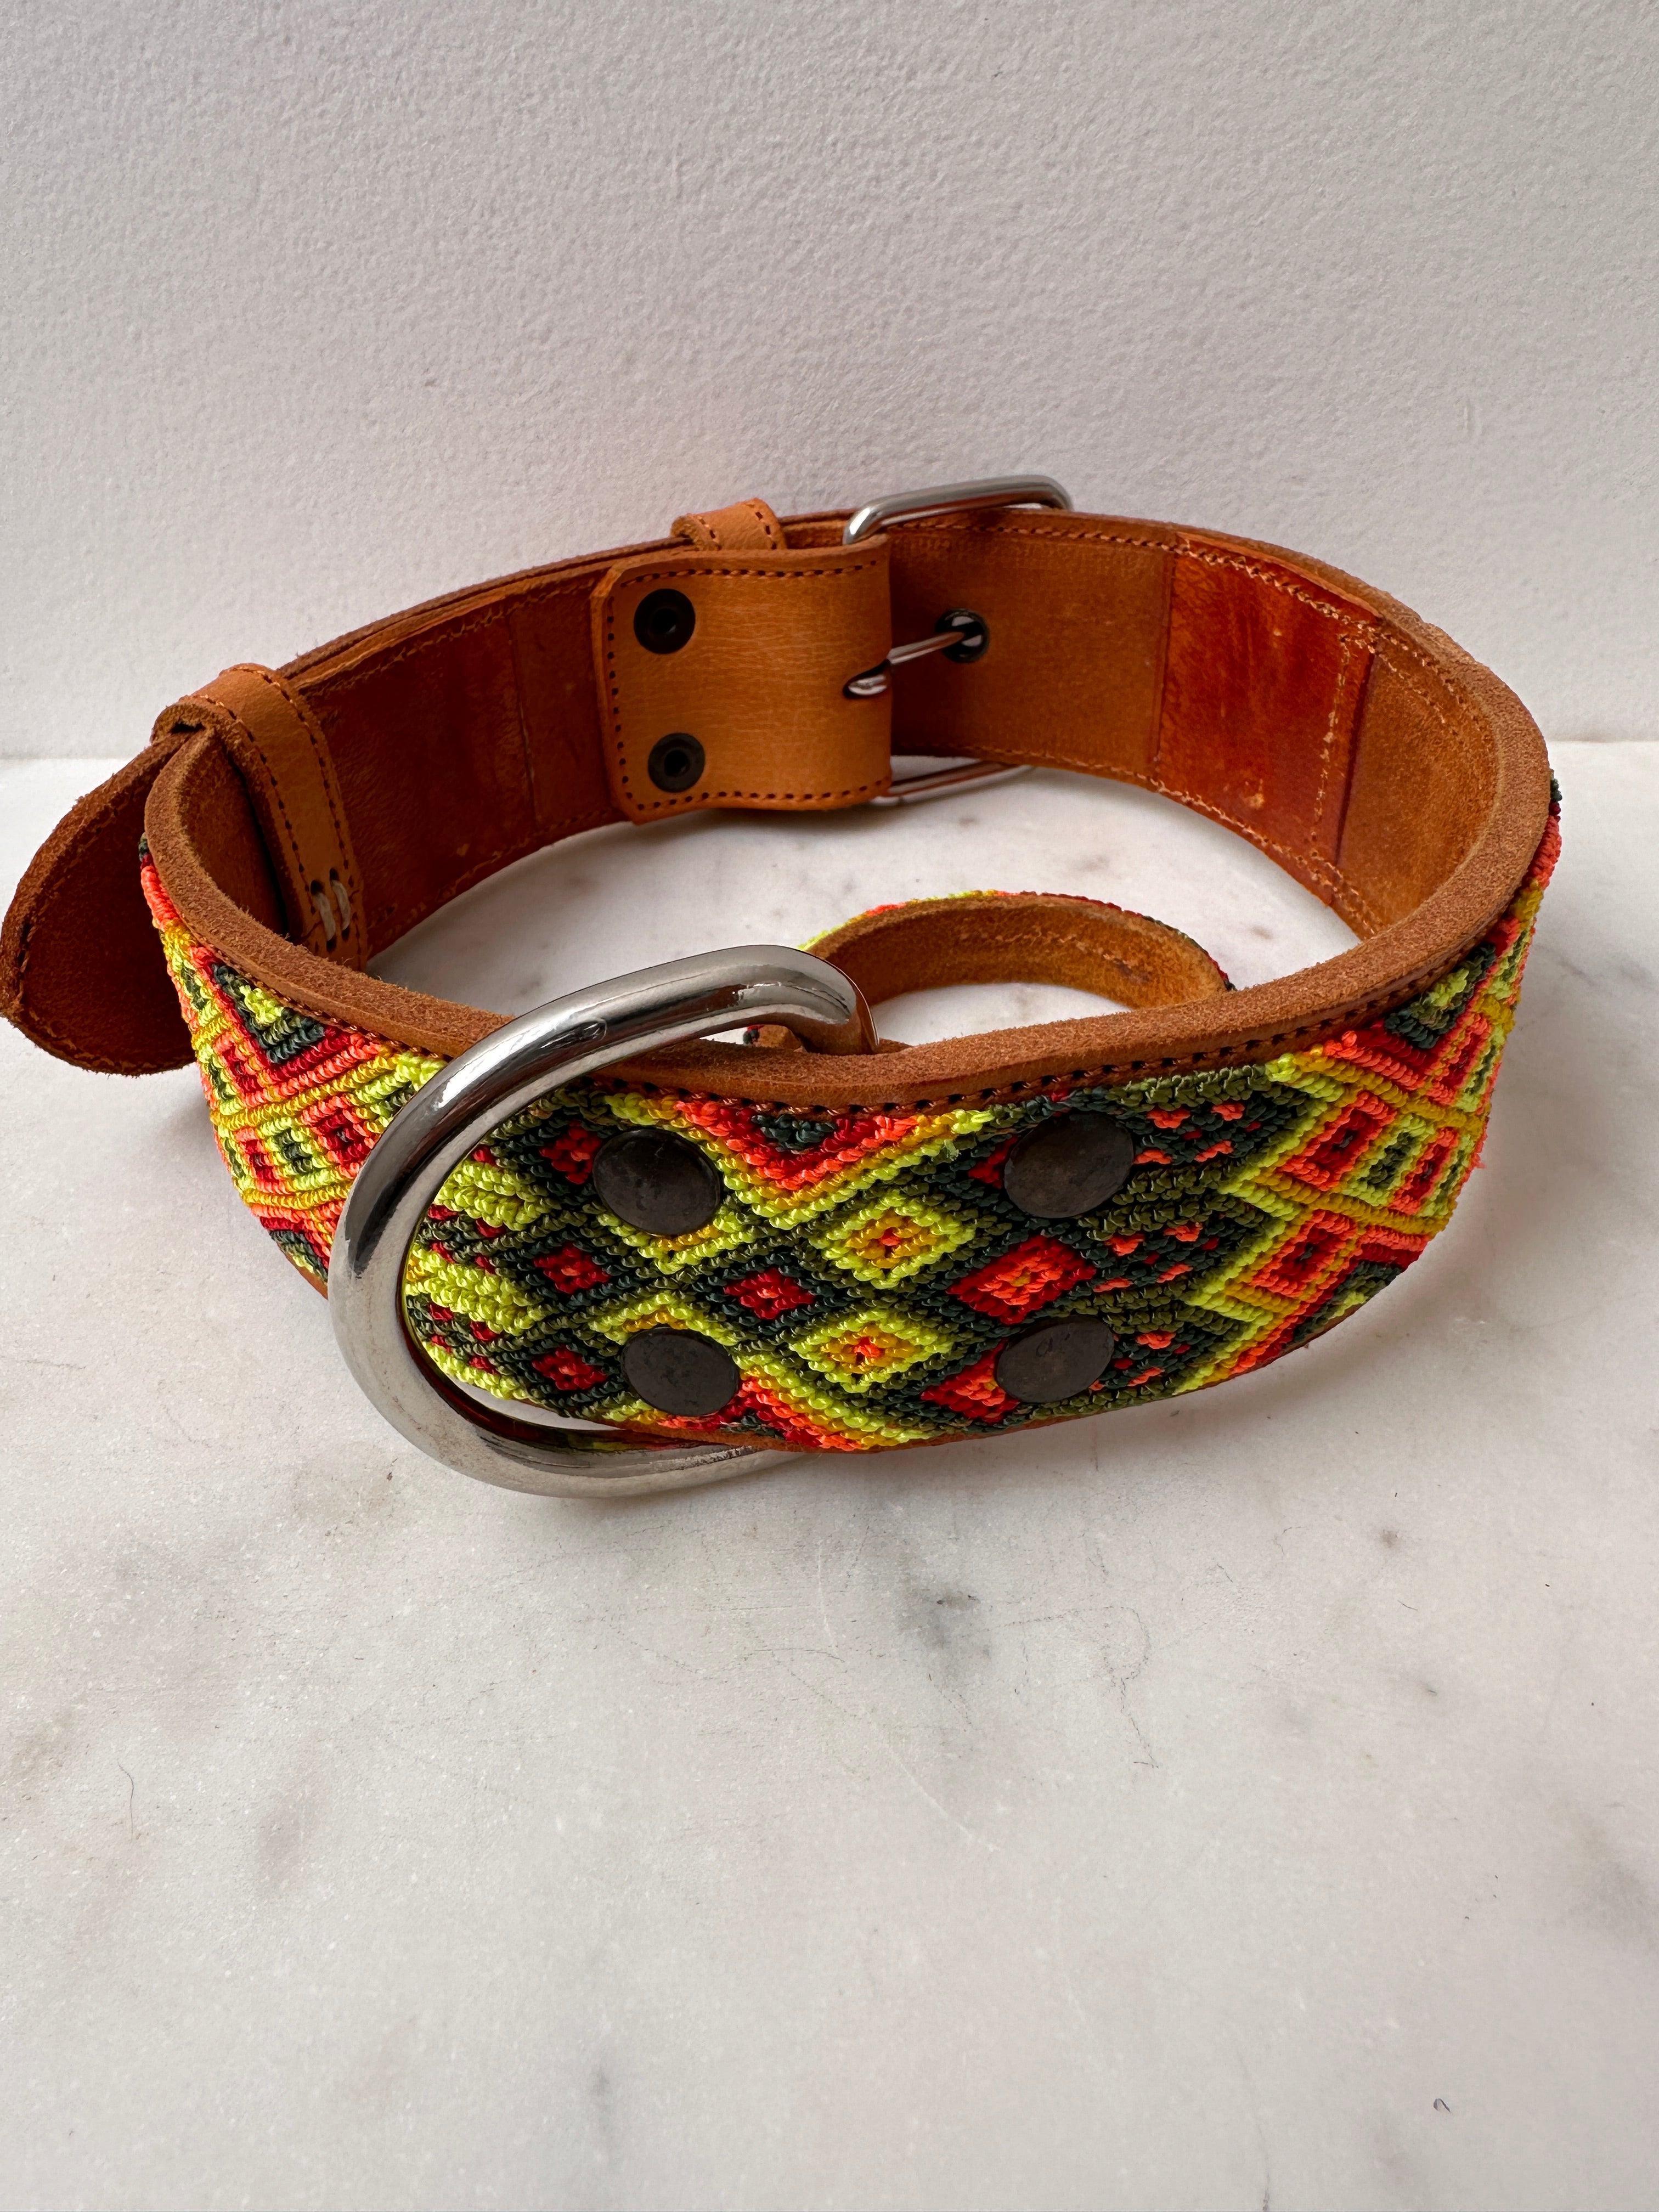 Future Nomads Homewares One Size Huichol Leather Wide Dog Collar L12